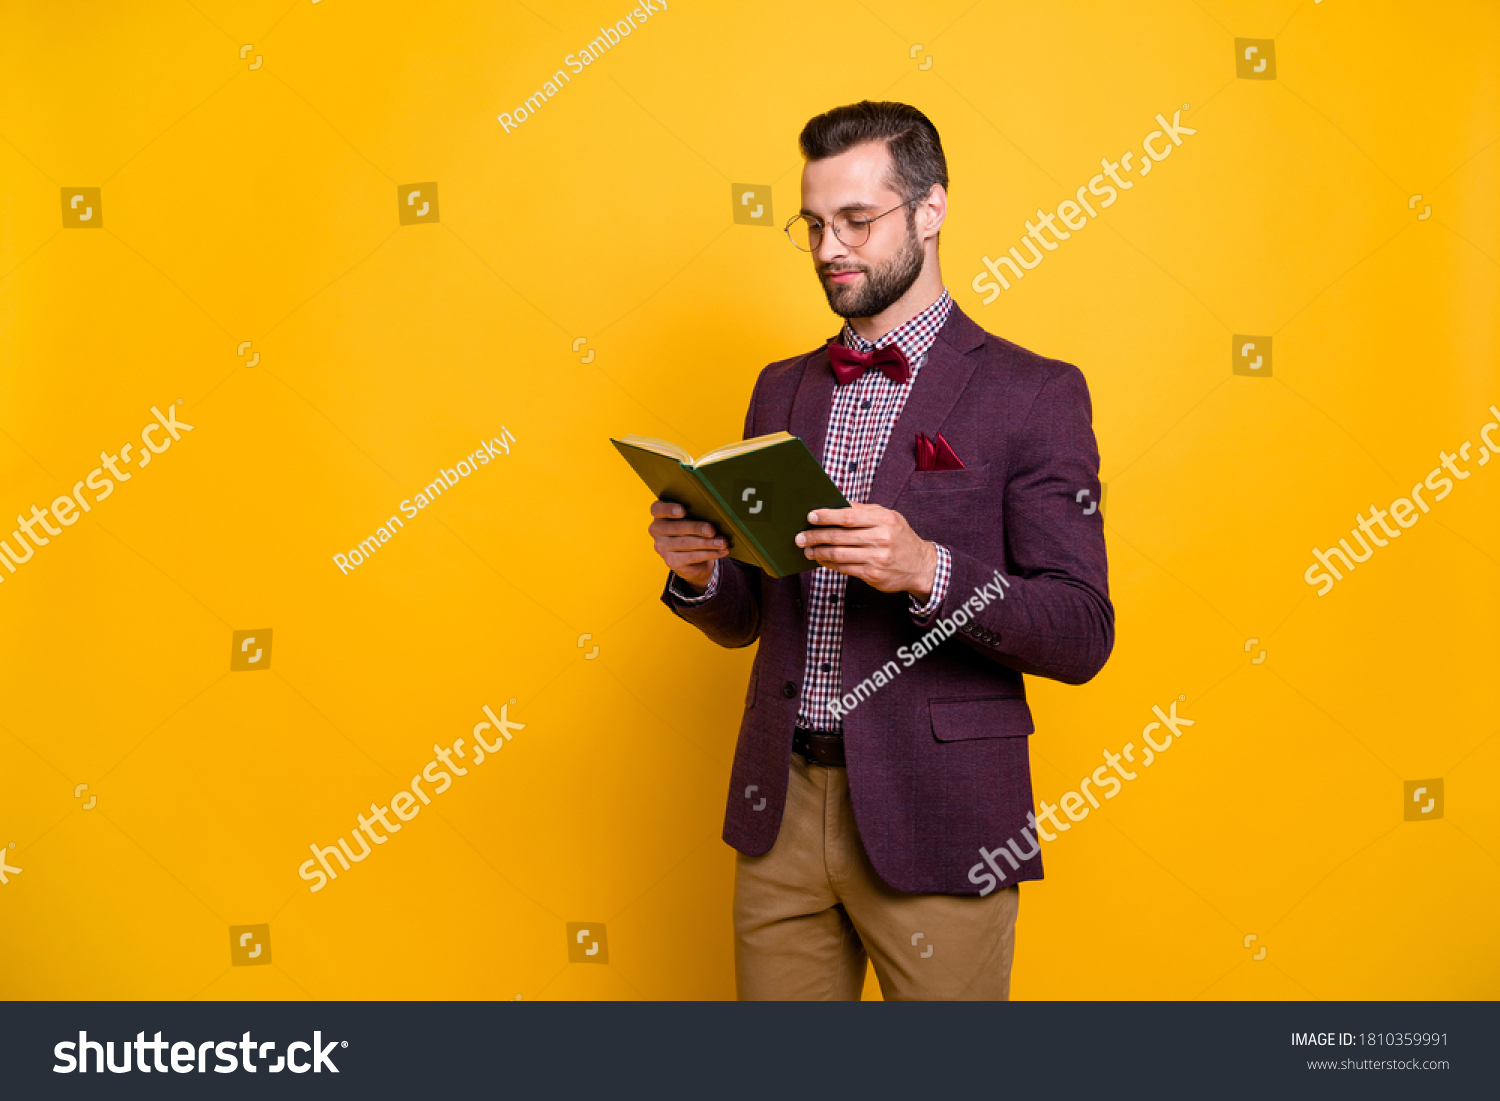 Portrait of his he nice attractive focused intellectual guy reading book academic learning free time knowledge library isolated over bright vivid shine vibrant yellow color background #1810359991